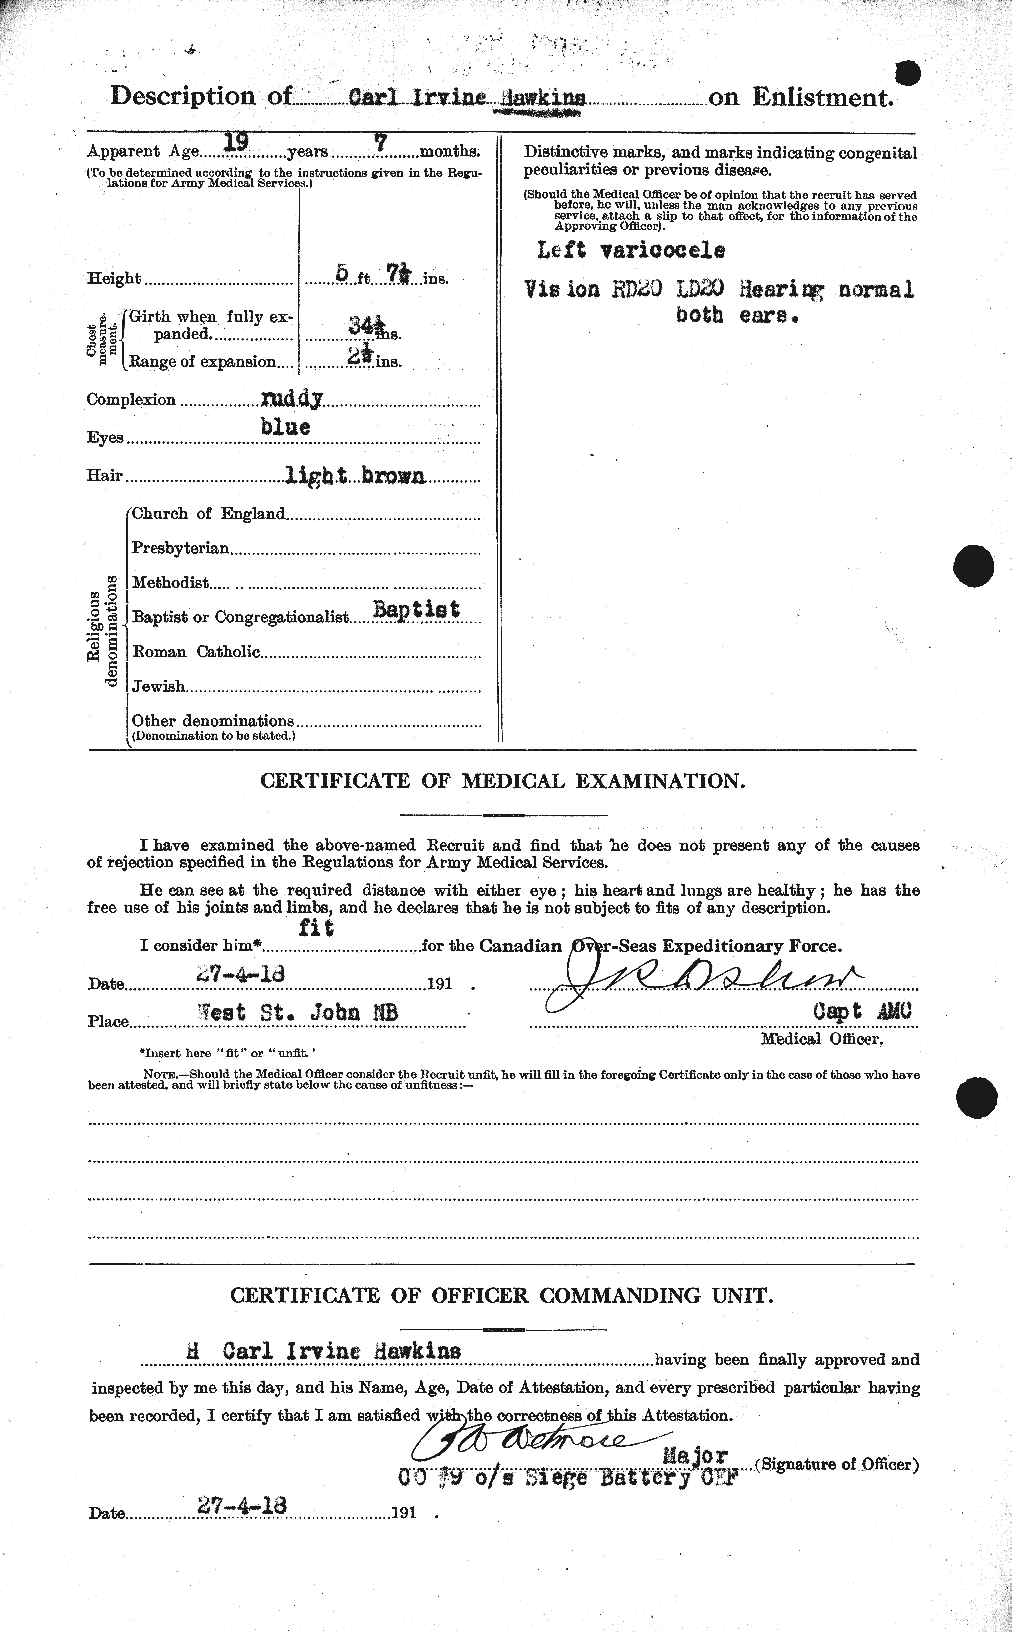 Personnel Records of the First World War - CEF 384640b